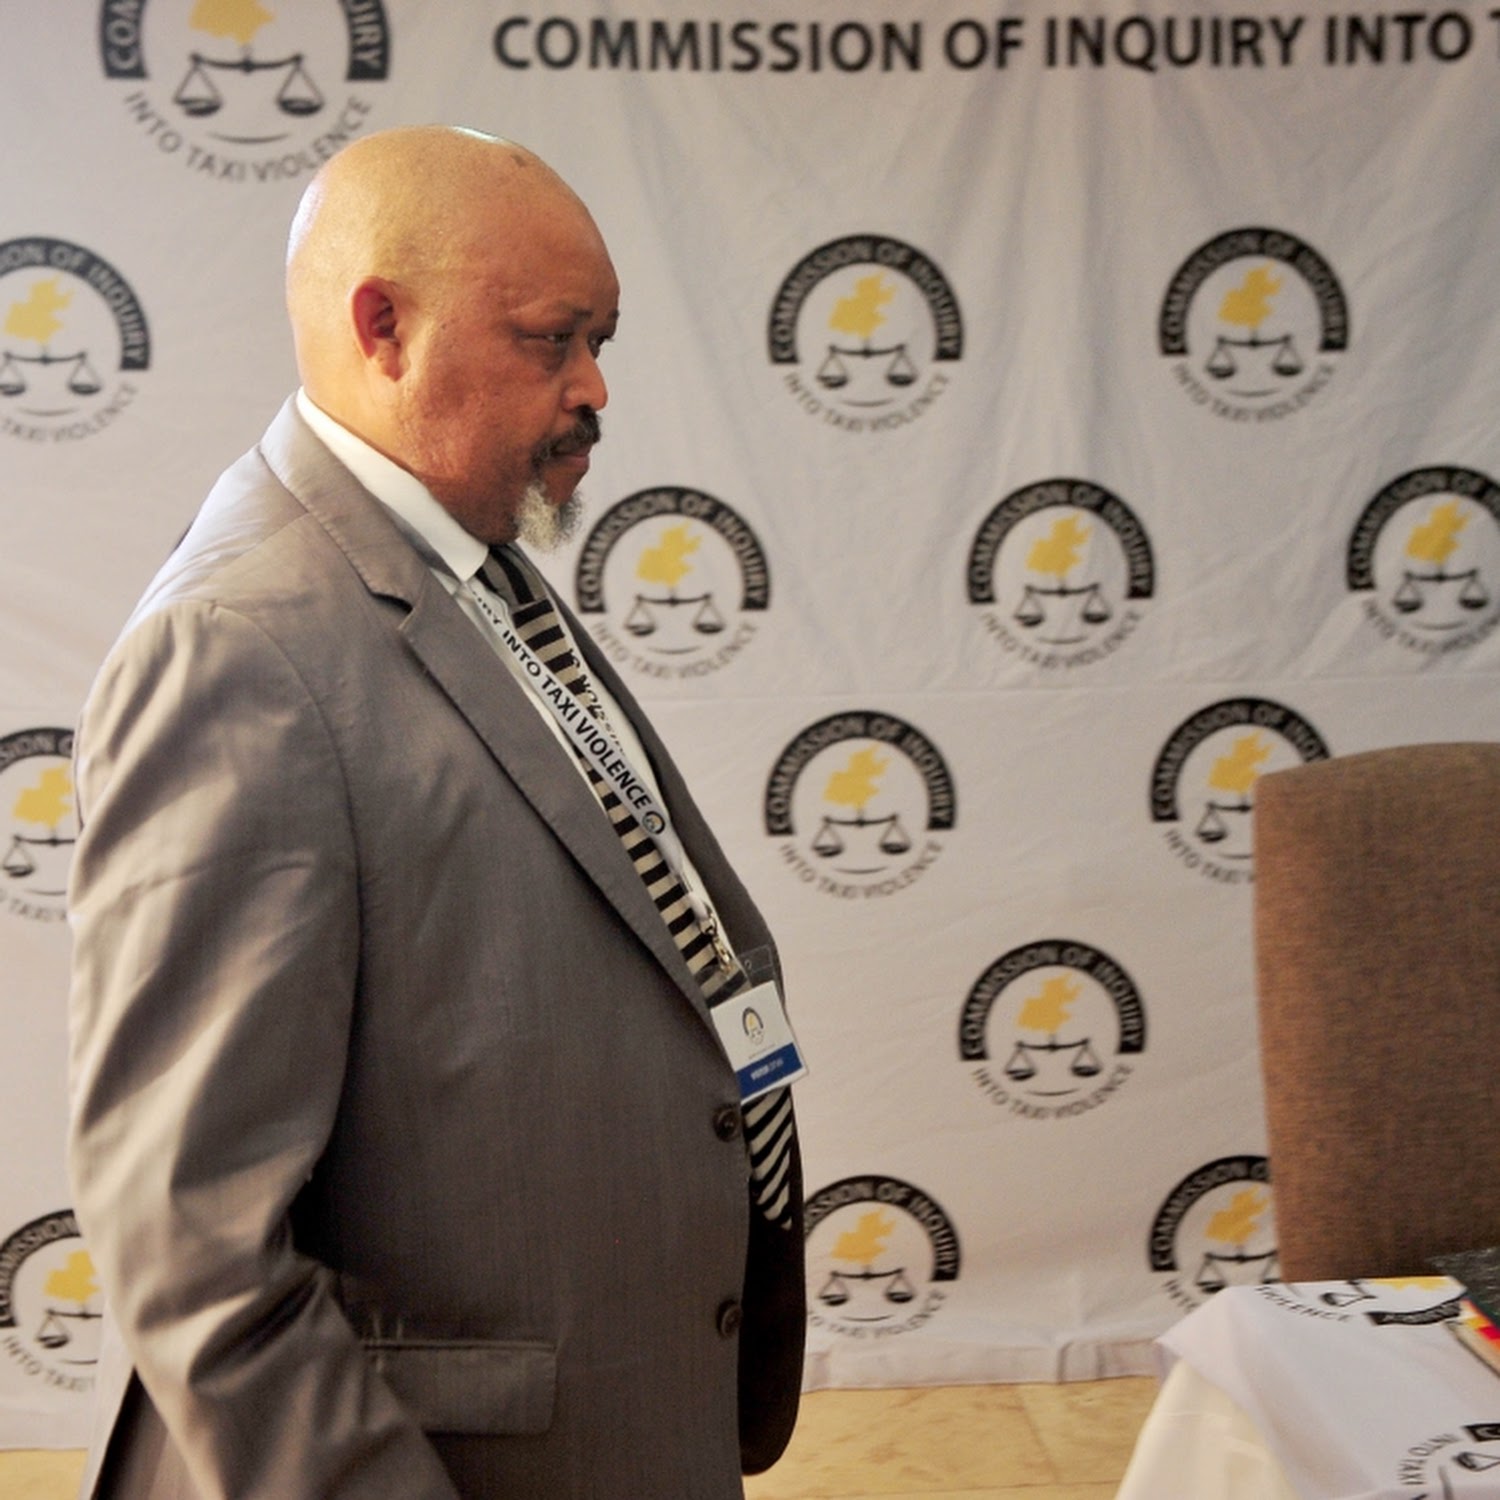 The Commission of Inquiry into taxi violence continues on 28 September 2020